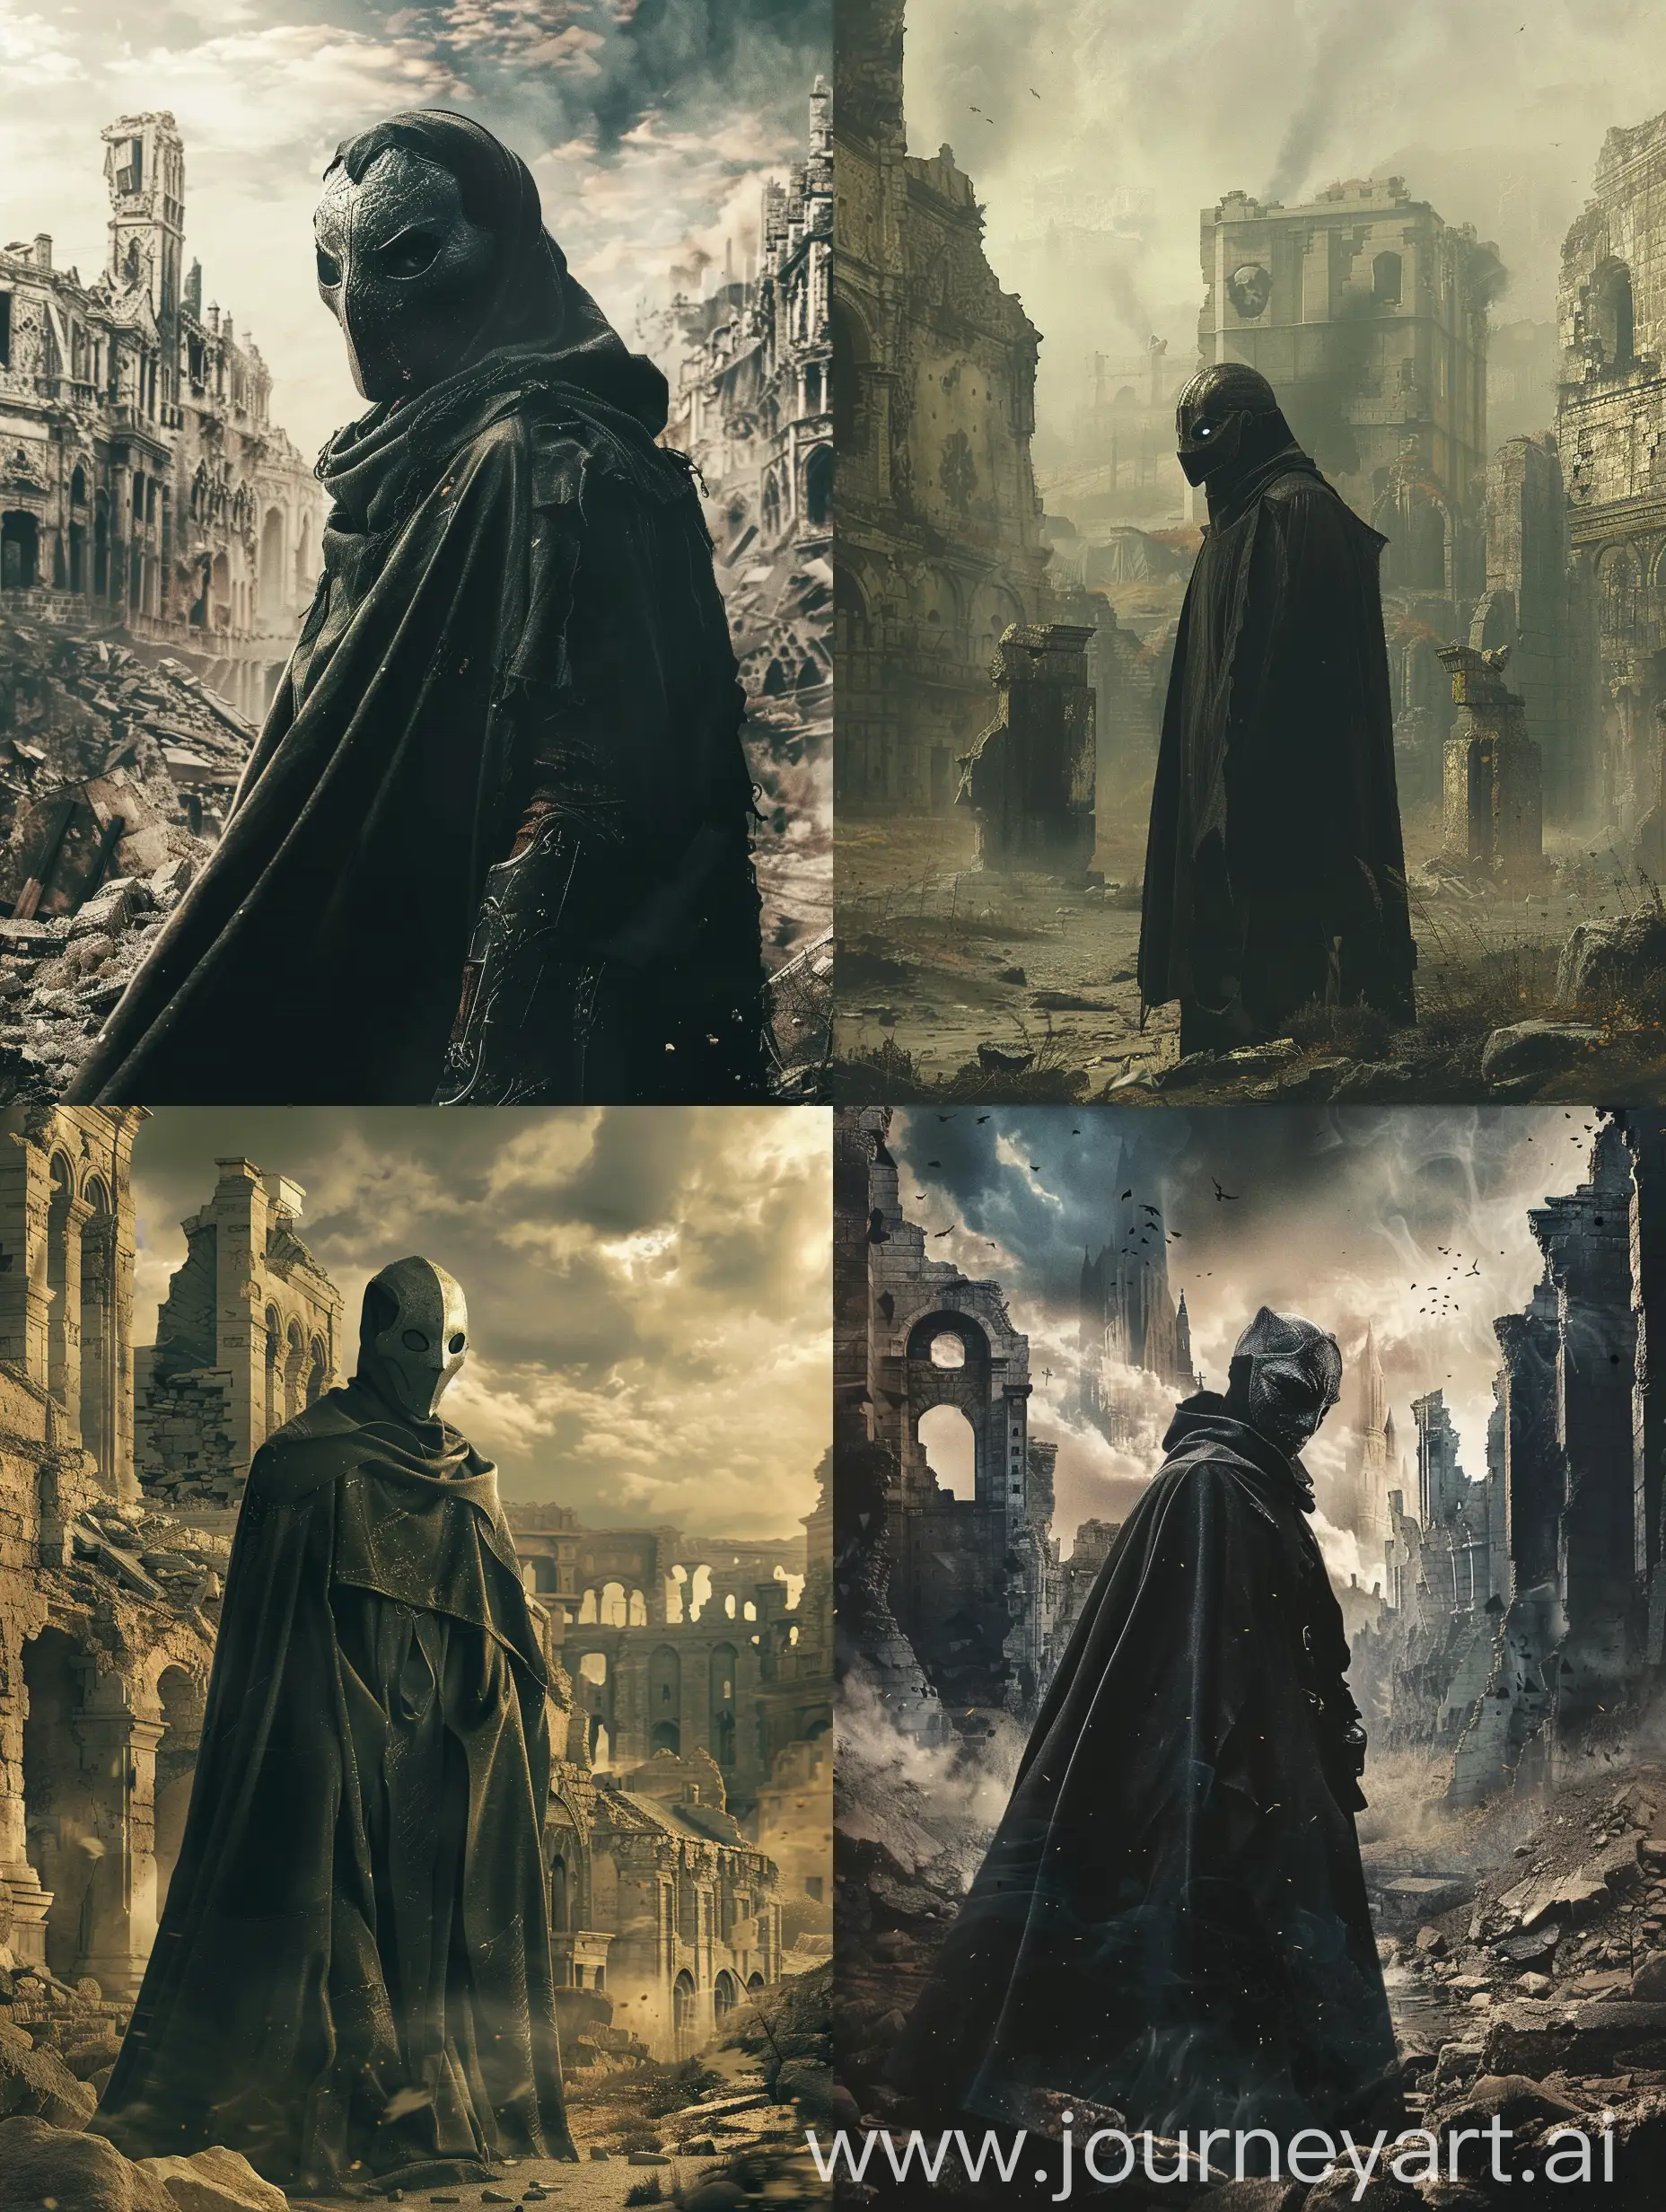 Mysterious-Figure-in-Ruined-Medieval-City-Dark-Cloak-and-Masked-Character